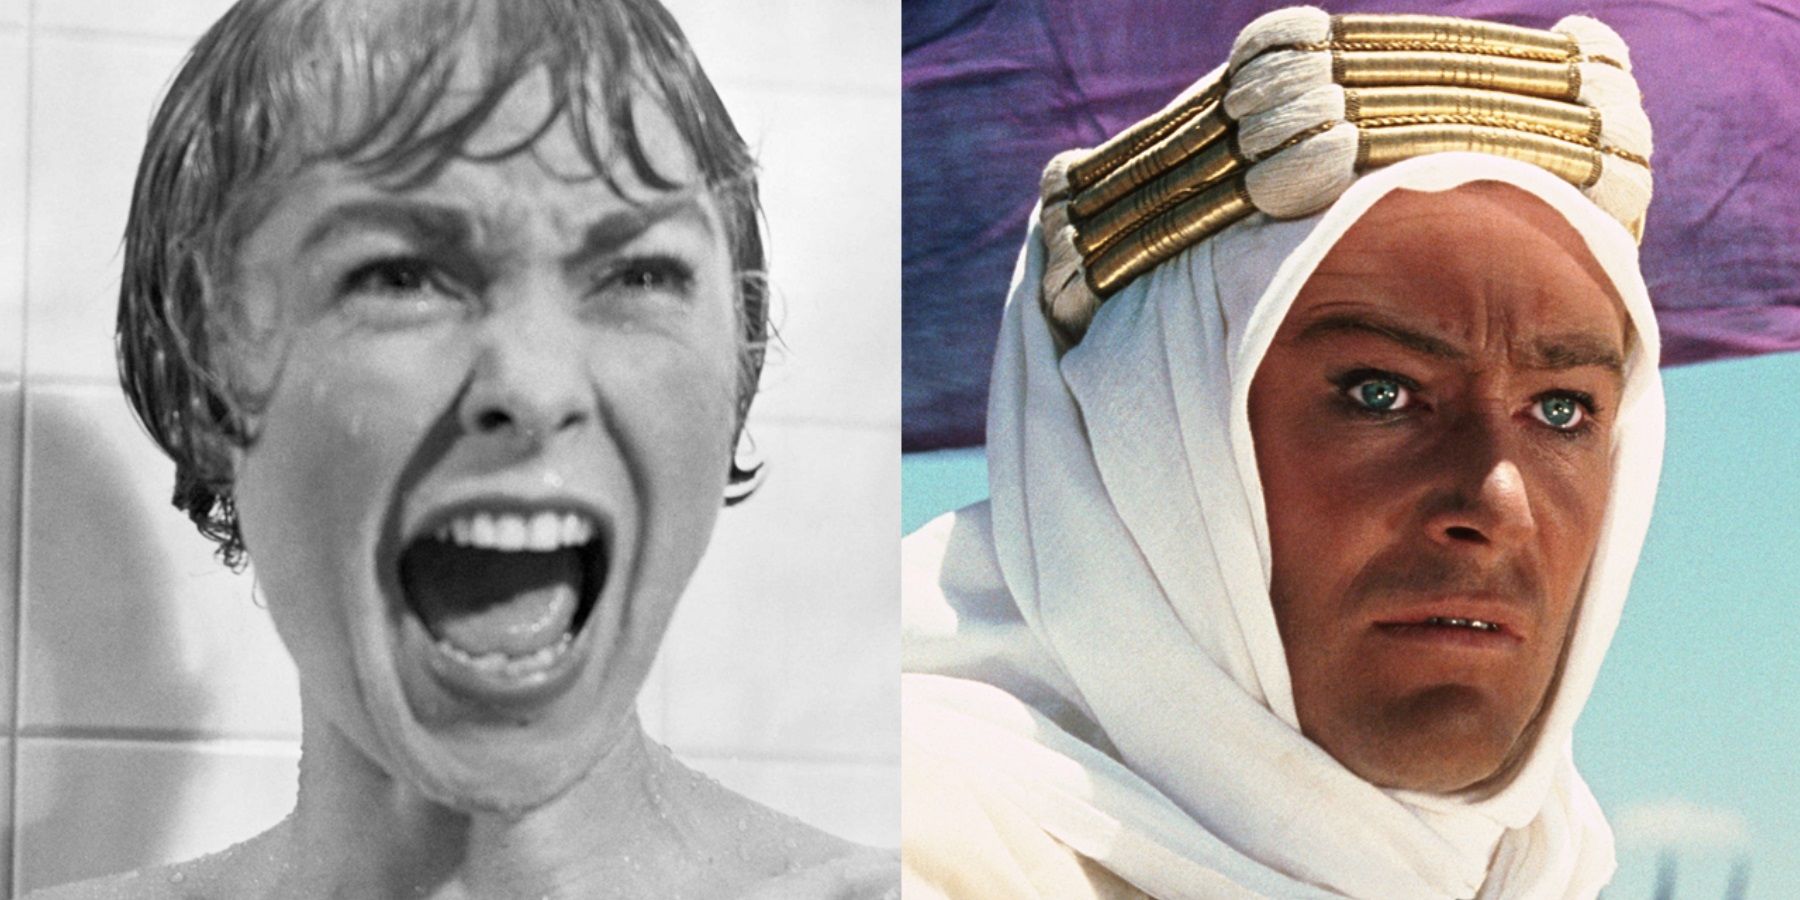 Split image of Janet Leigh in Psycho and Peter O'Toole in Lawrence of Arabia